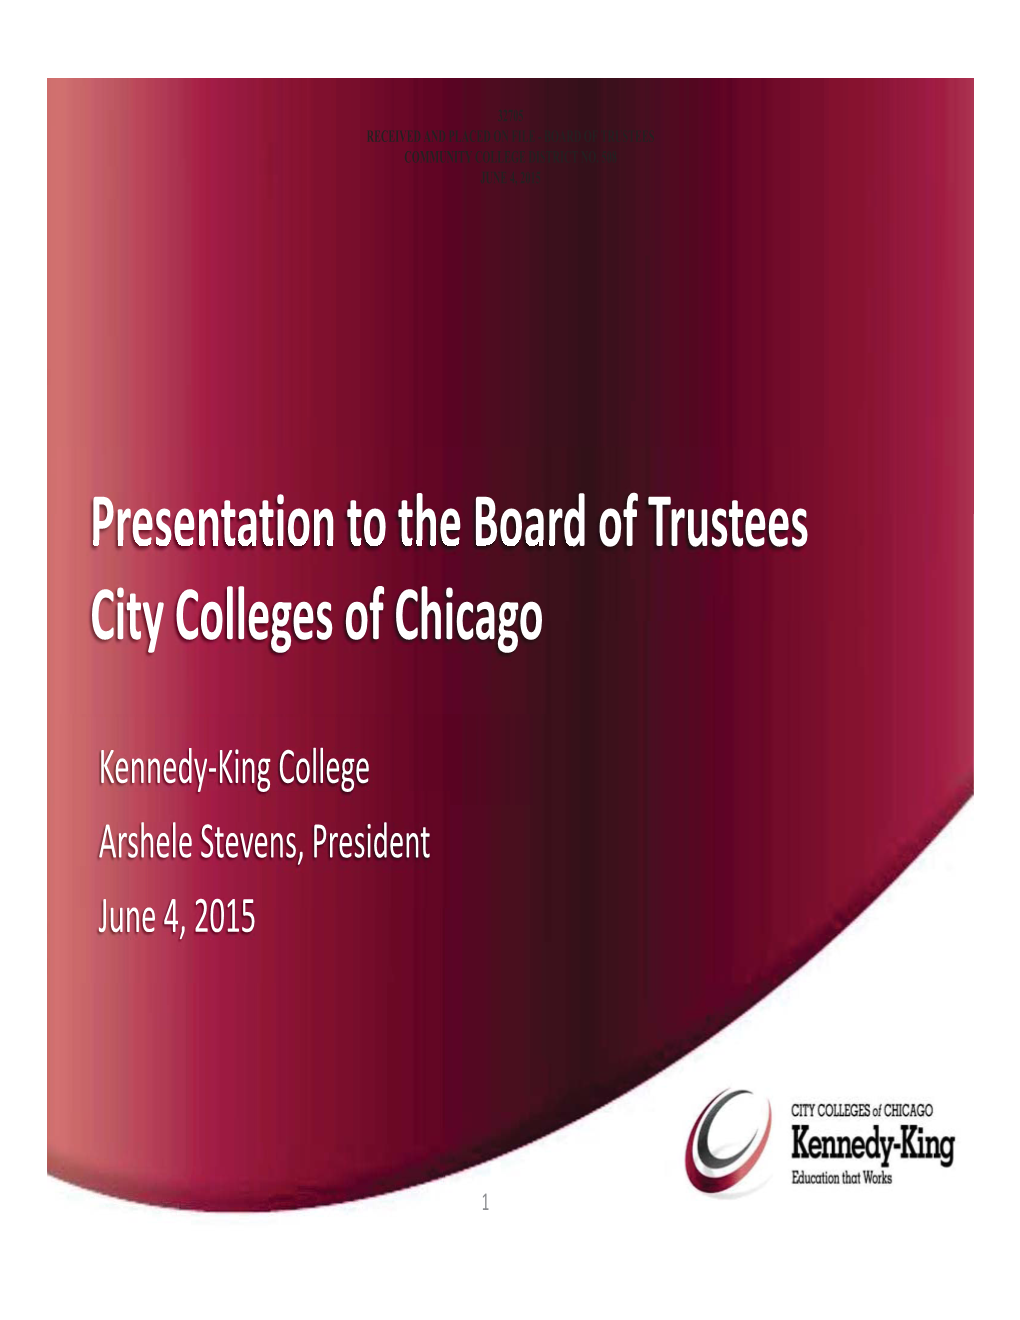 Presentation to the Board of Trustees City Colleges of Chicago